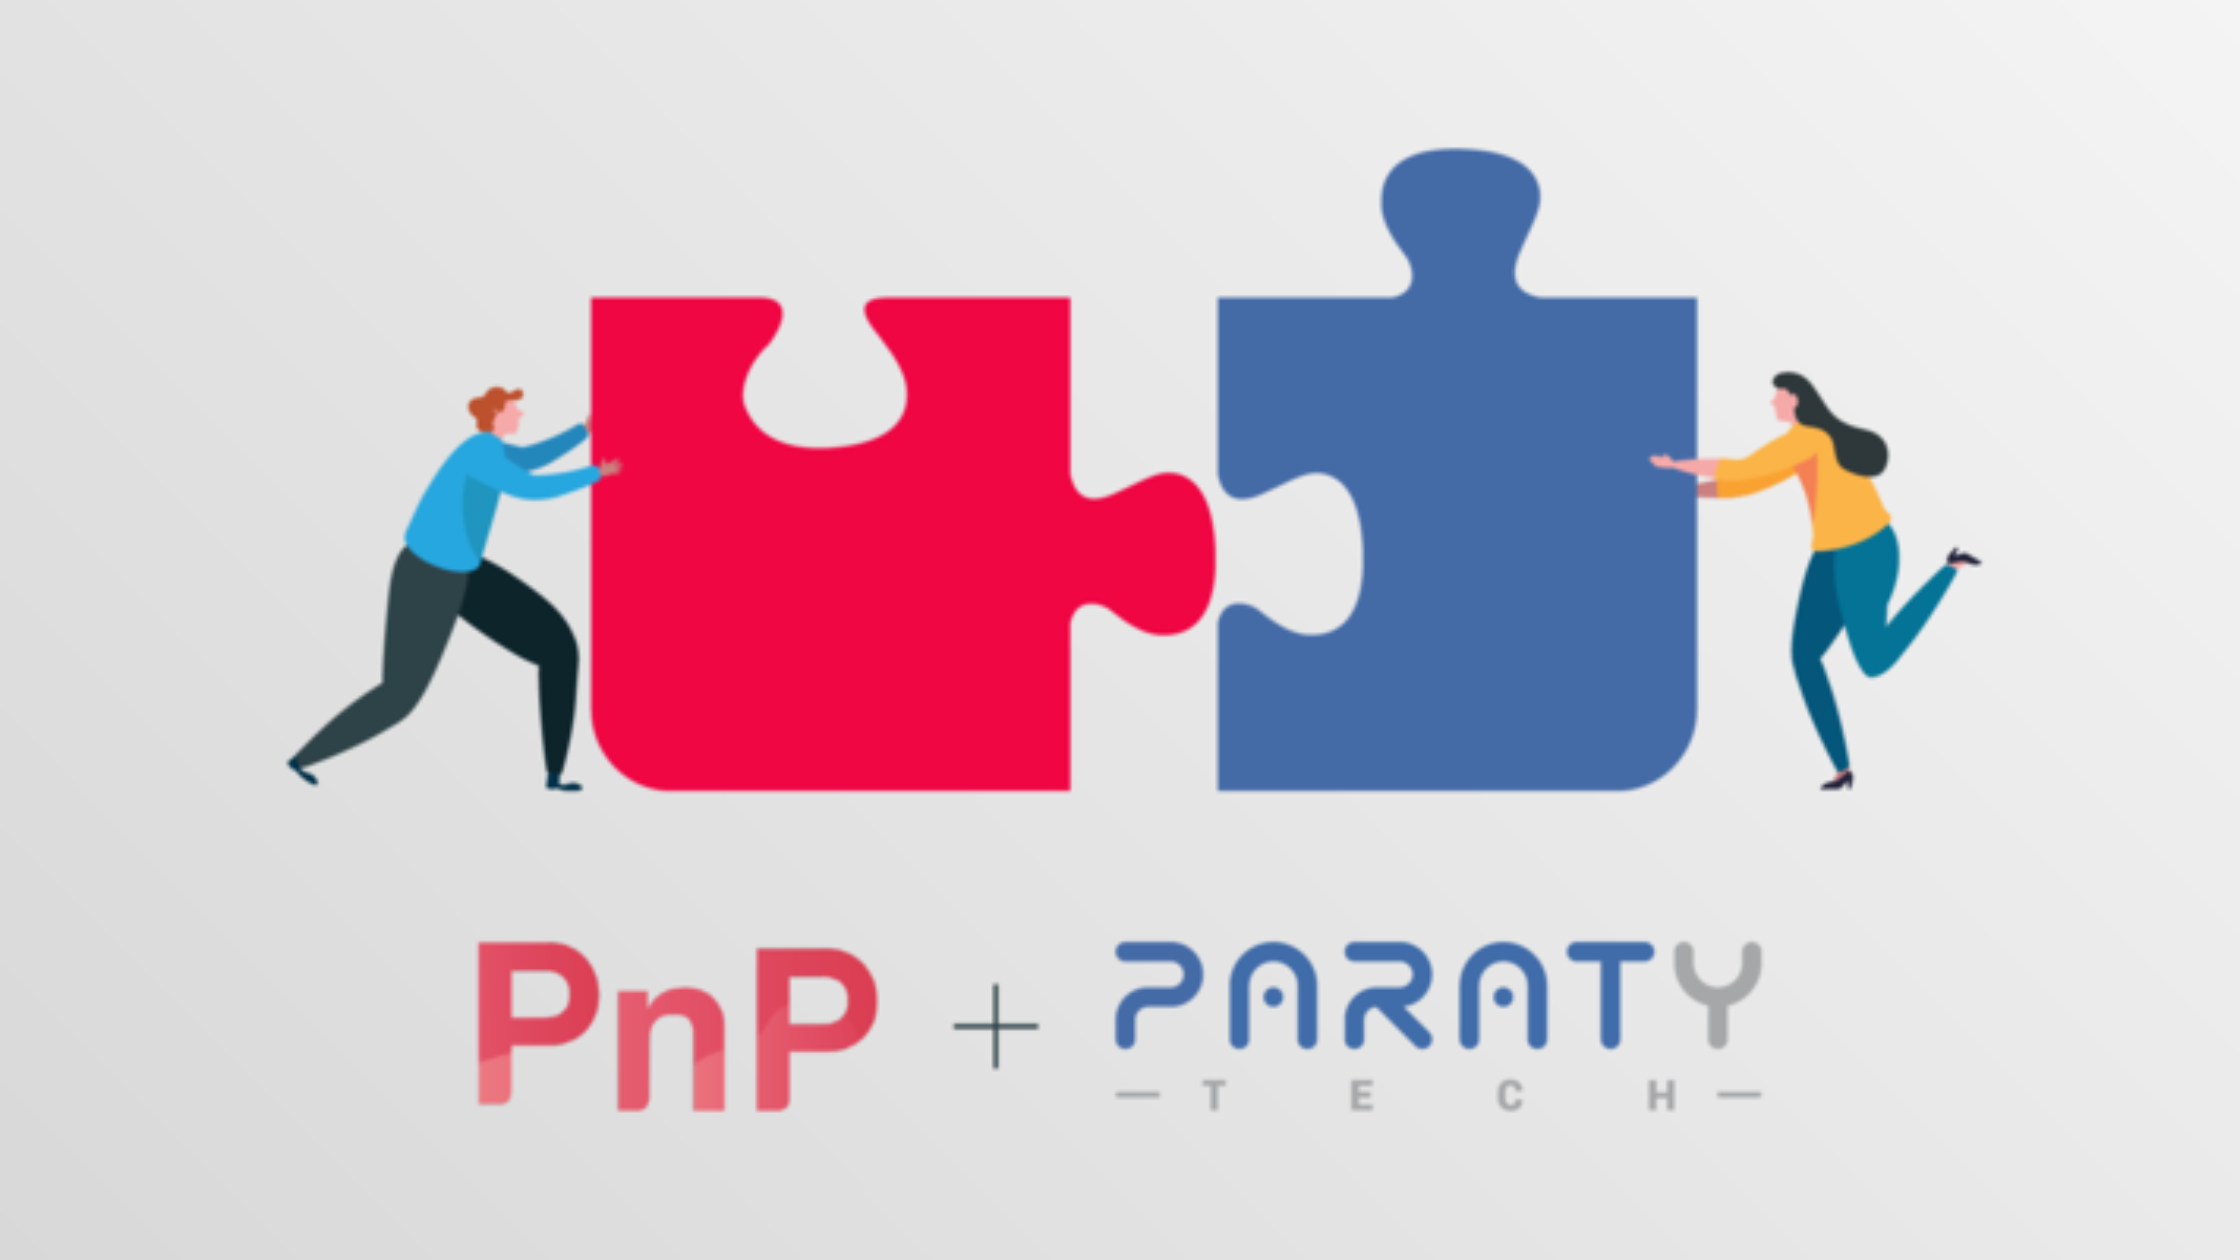 a logo for pnp + paraty tech with two people putting together a puzzle piece